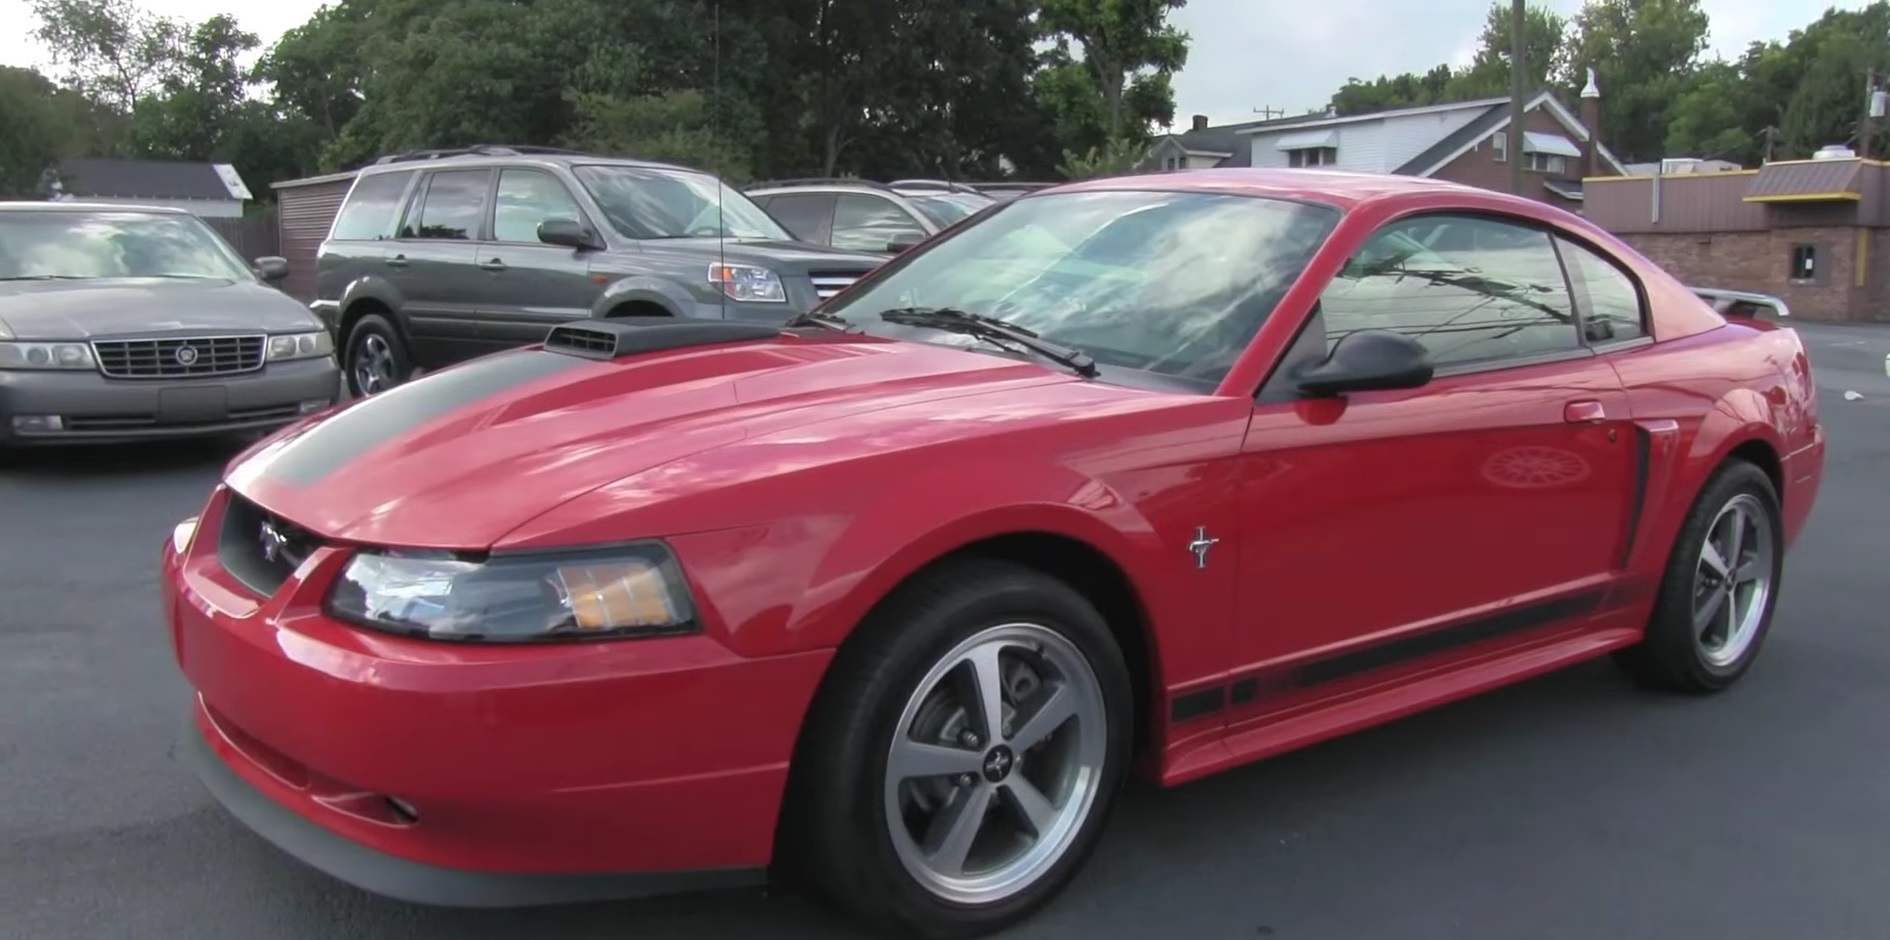 Video: Detailed Look At A 2003 Ford Mustang Mach 1